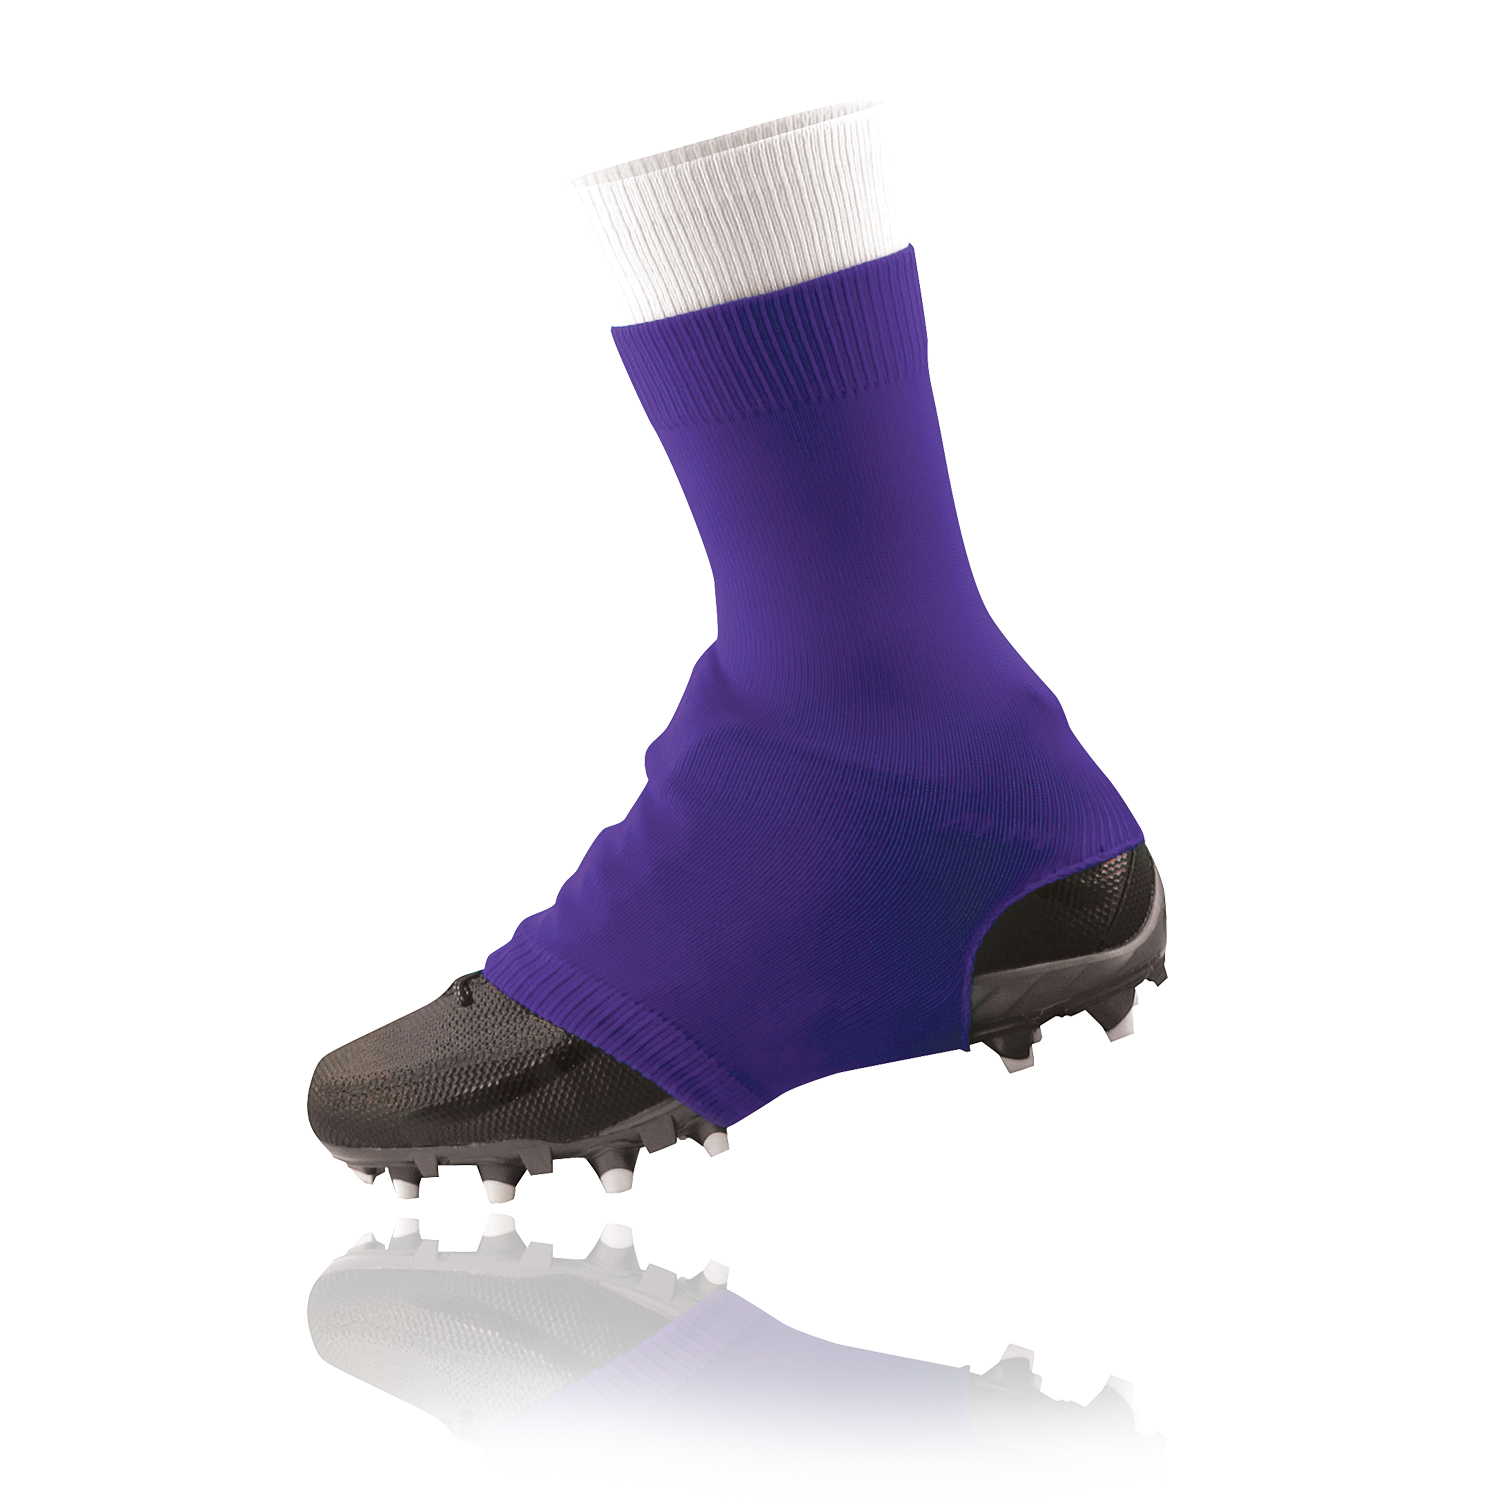 Tone Spats Football Cleat Covers 